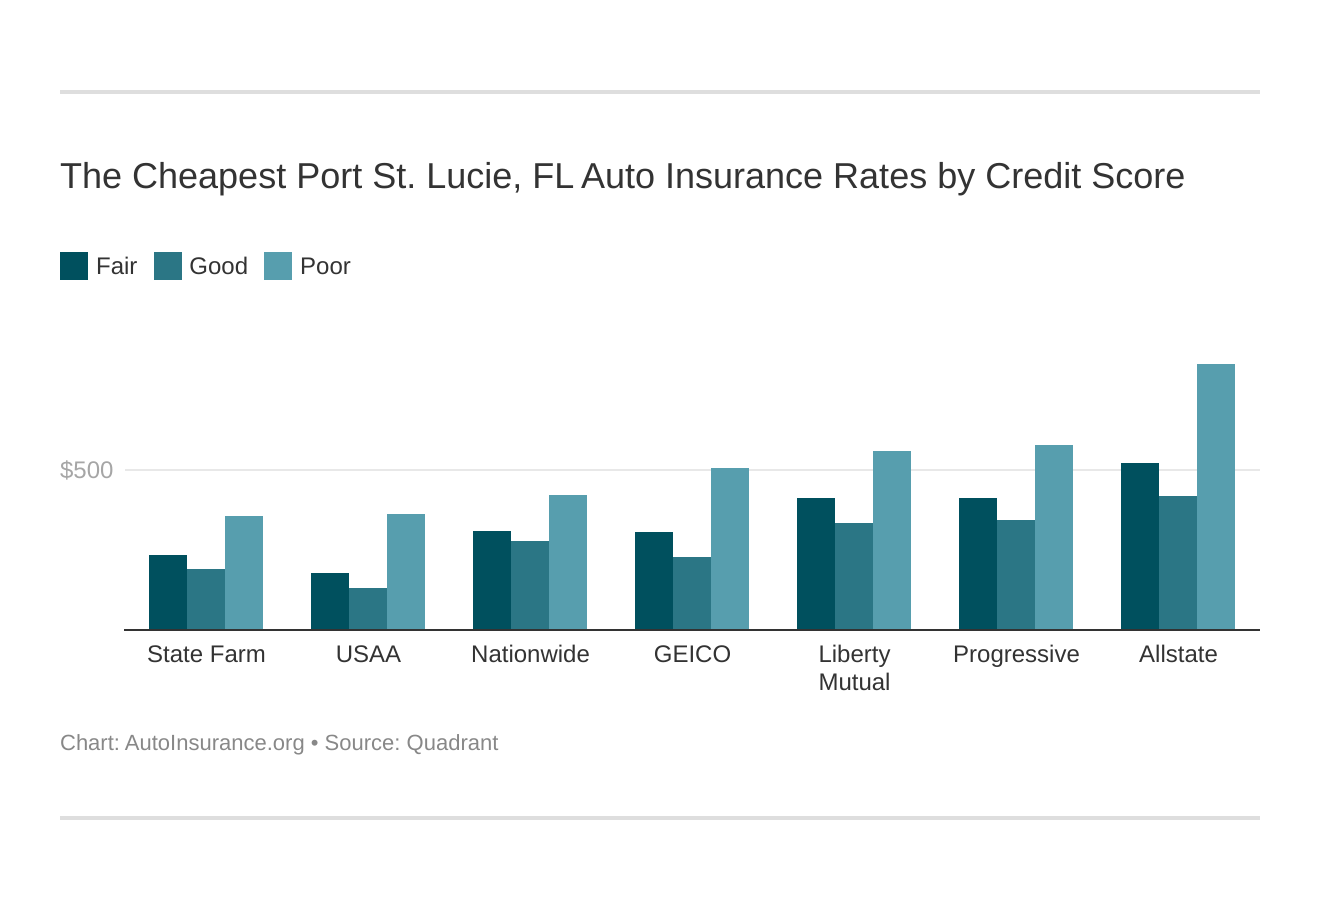 The Cheapest Port St. Lucie, FL Auto Insurance Rates by Credit Score